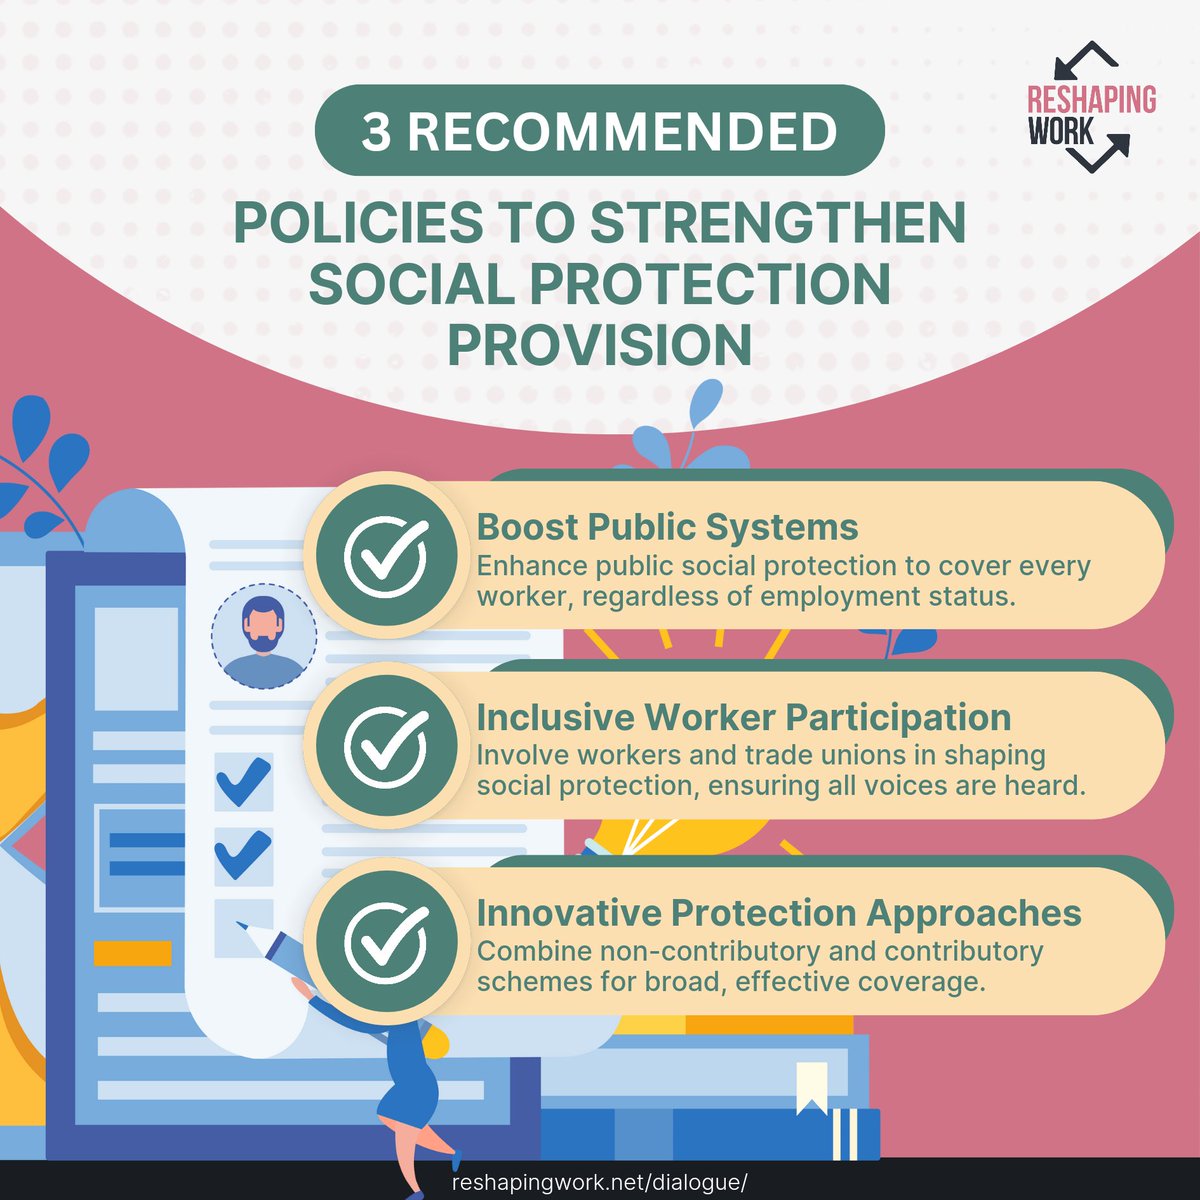 🚀 A Blueprint for Stronger Social Protection 1. Boost Public Systems - We advocate to invest in and strengthen publicly provided social protection systems to safeguard the most vulnerable members of society.